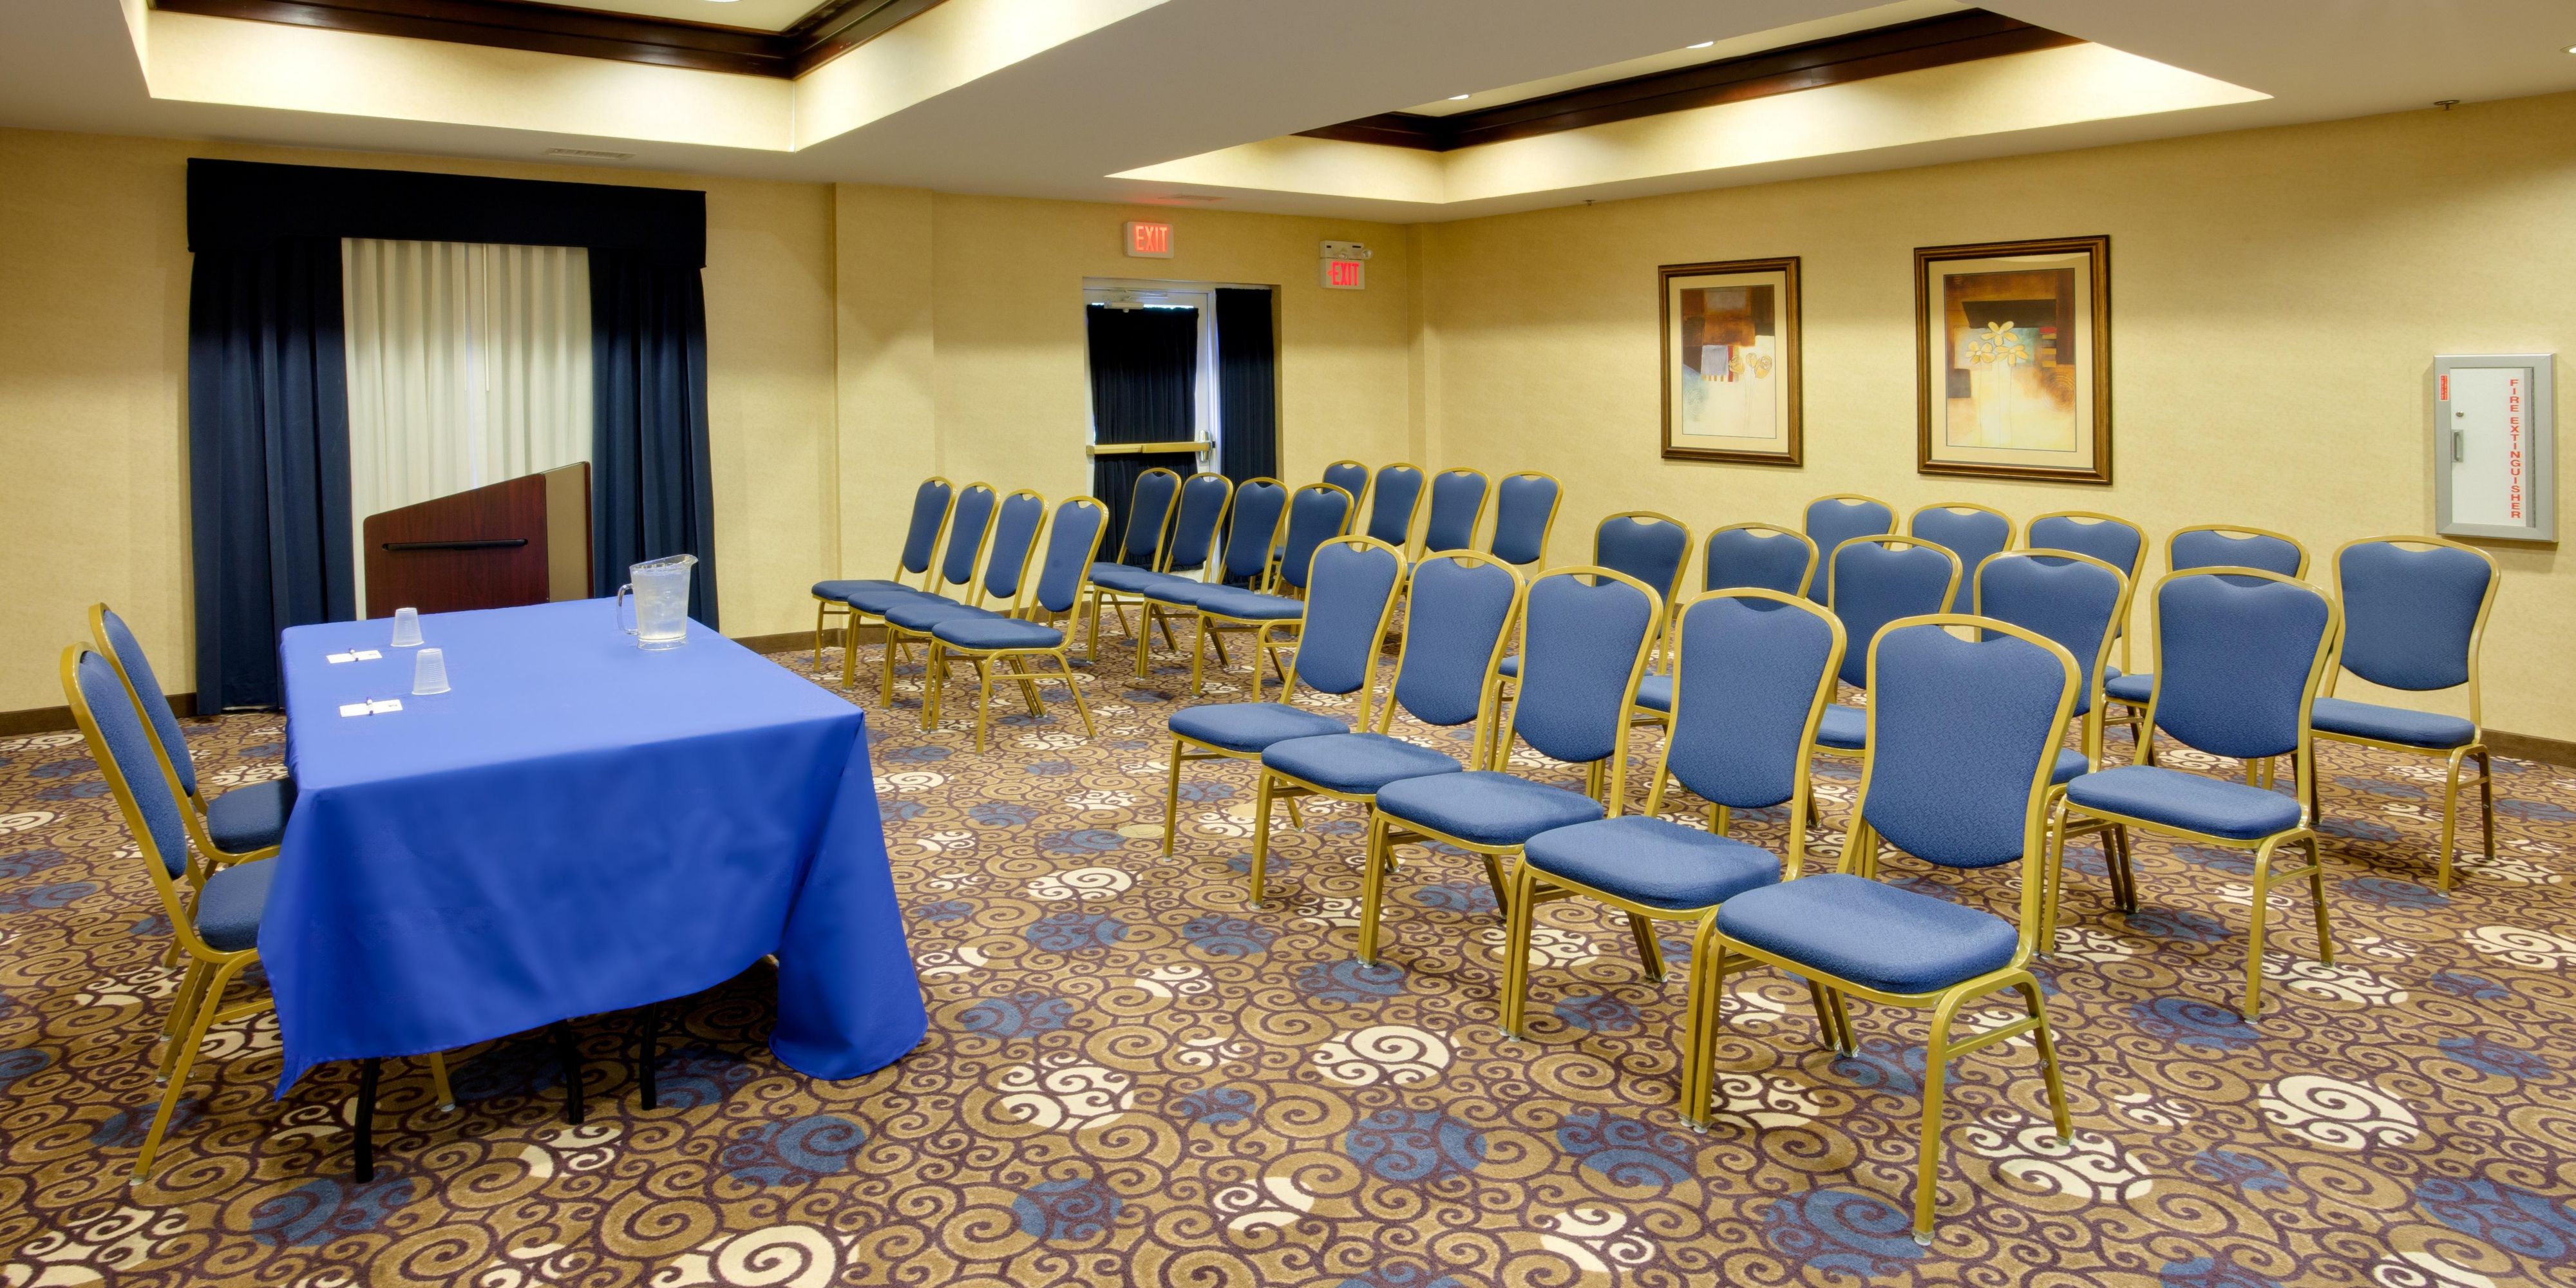 Small meetings play a vital role in the success of many organizations. Are you planning a small corporate meeting, board retreat or brainstorming session? Our meeting space is sure to lead to big ideas! For groups up to 10 people, we can help! Our Director of Sales is dedicated to making your meeting a huge success